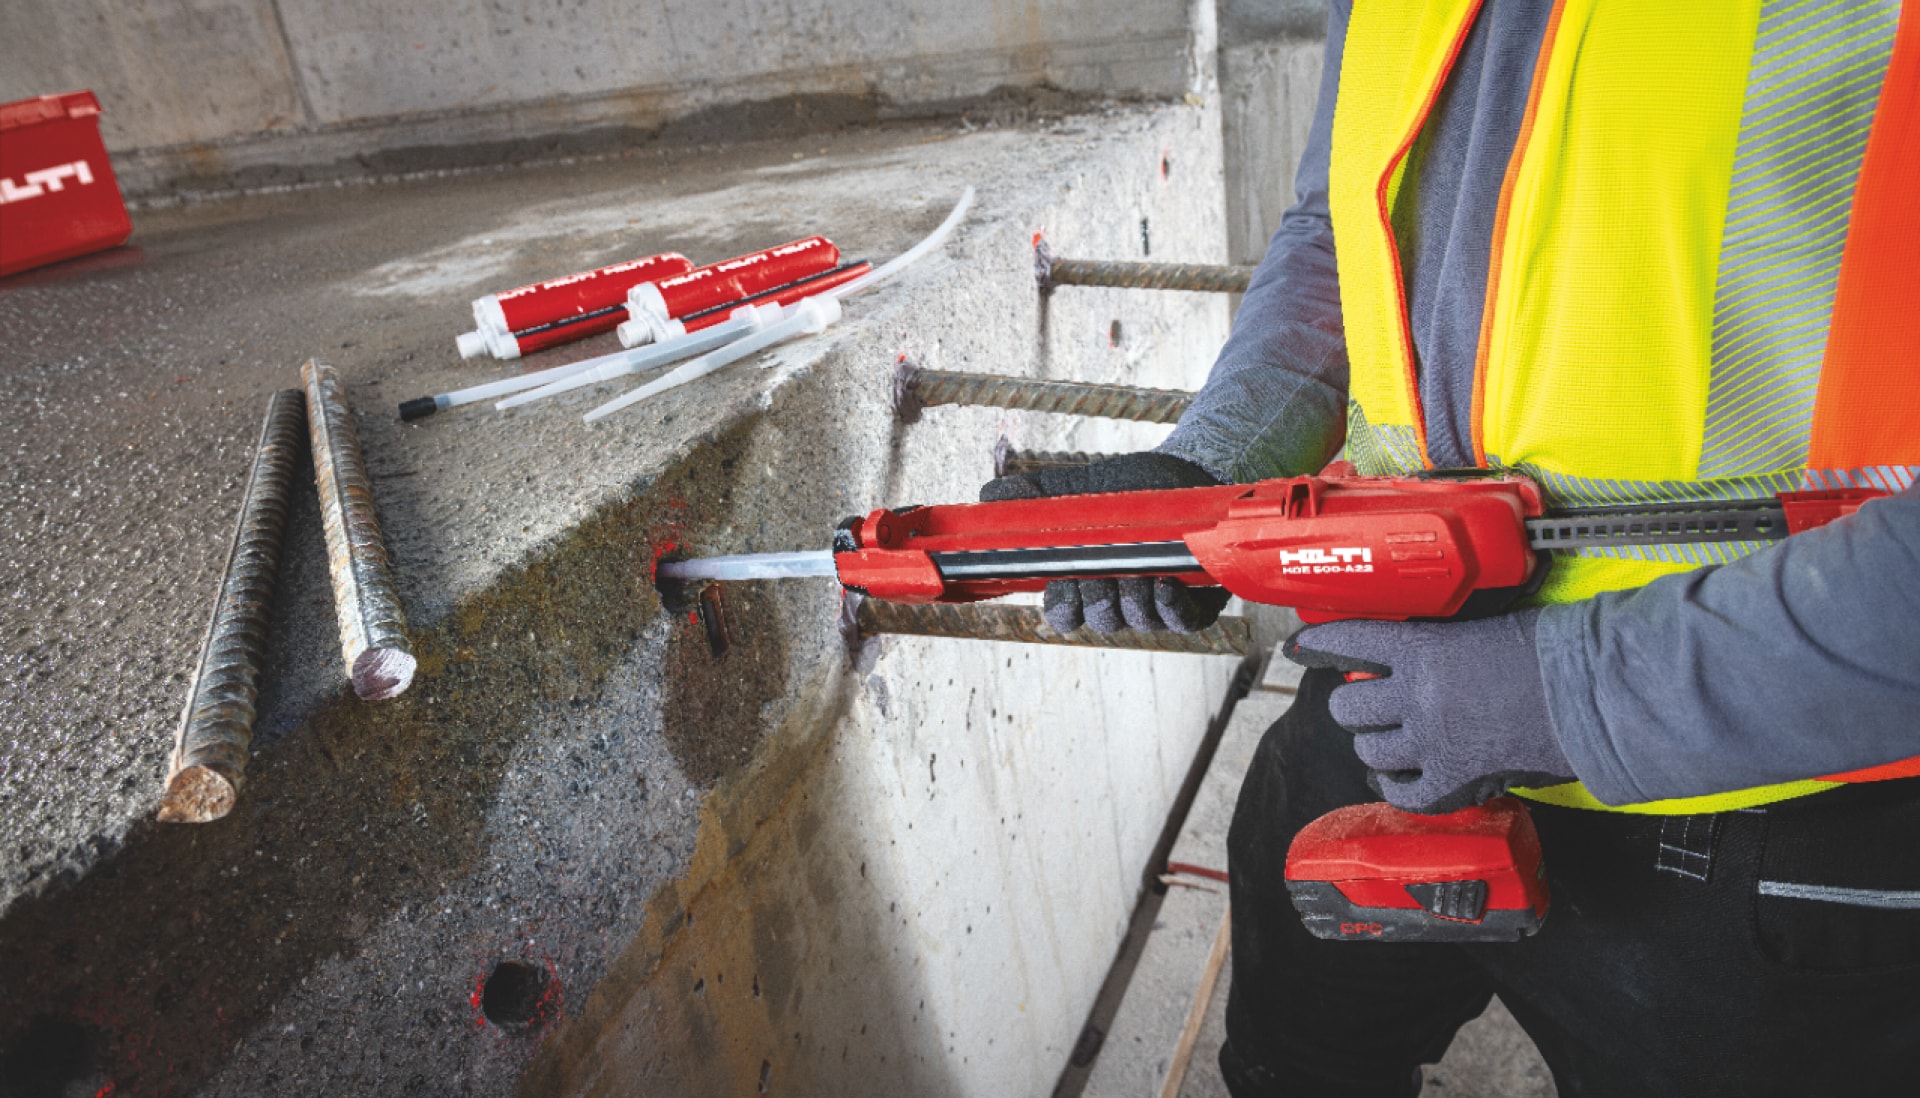 HIT-HY 200-R V3- rebar installation with the HDE 500-A22 chemical anchor dispenser